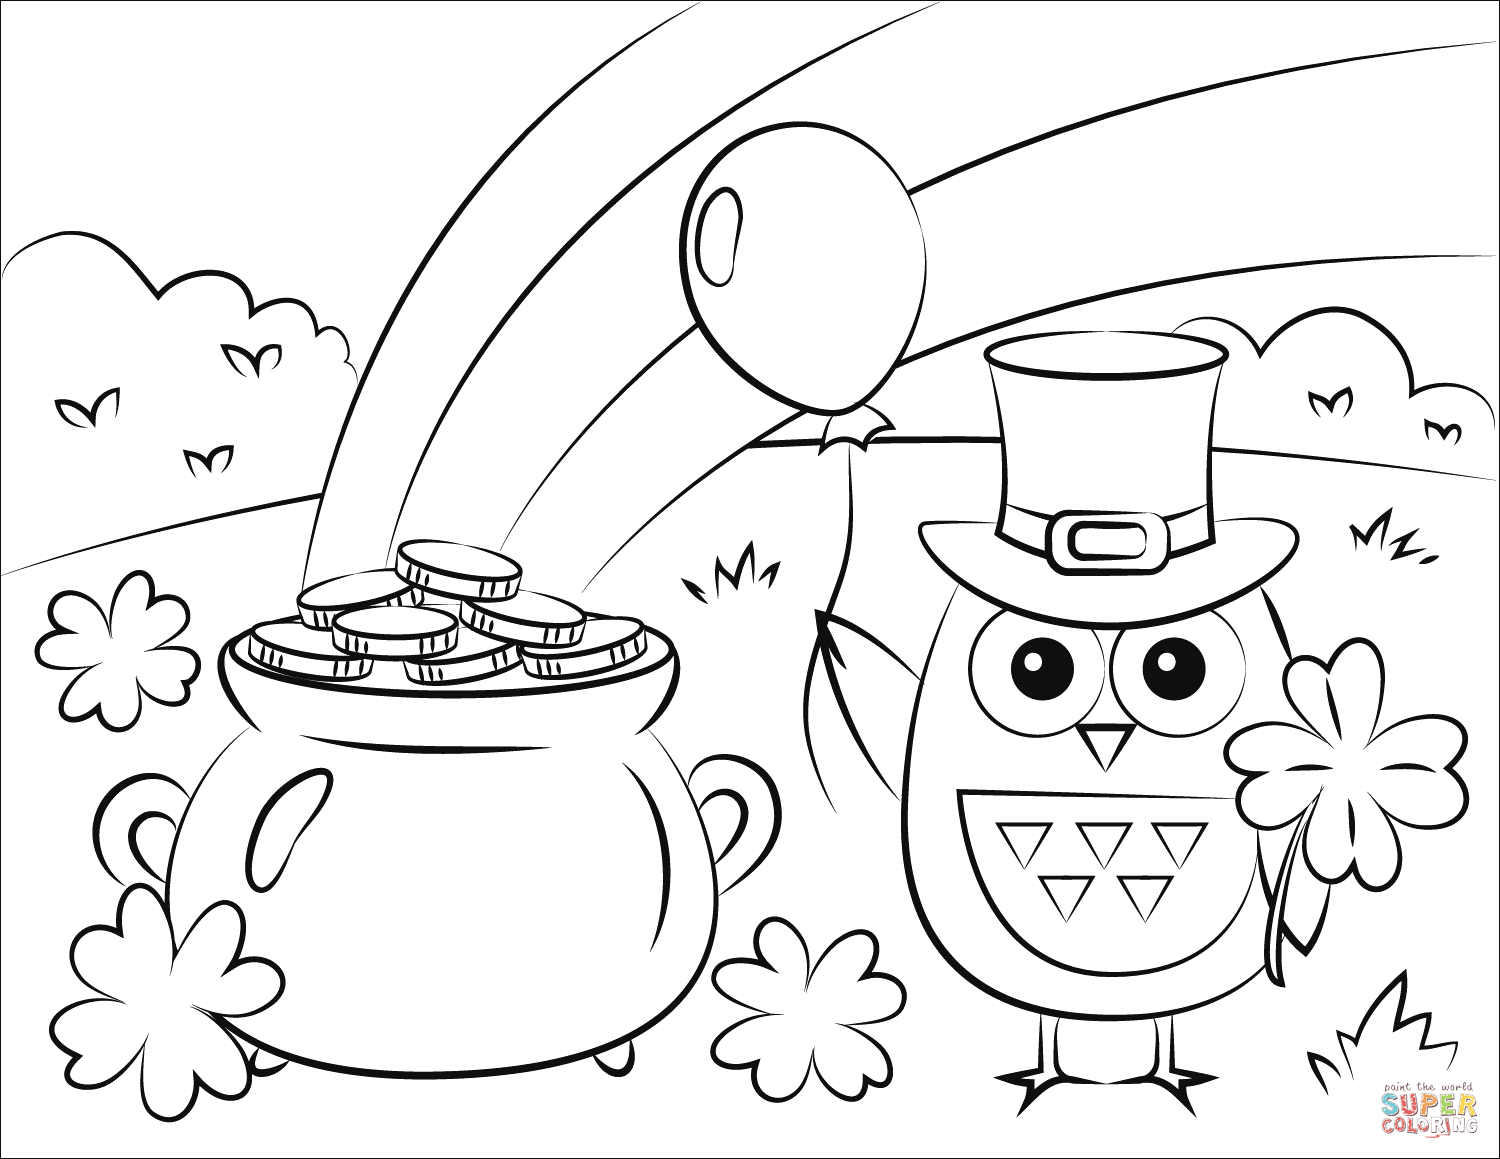 Pot of gold rainbow and st patricks day owl coloring page free printable coloring pages